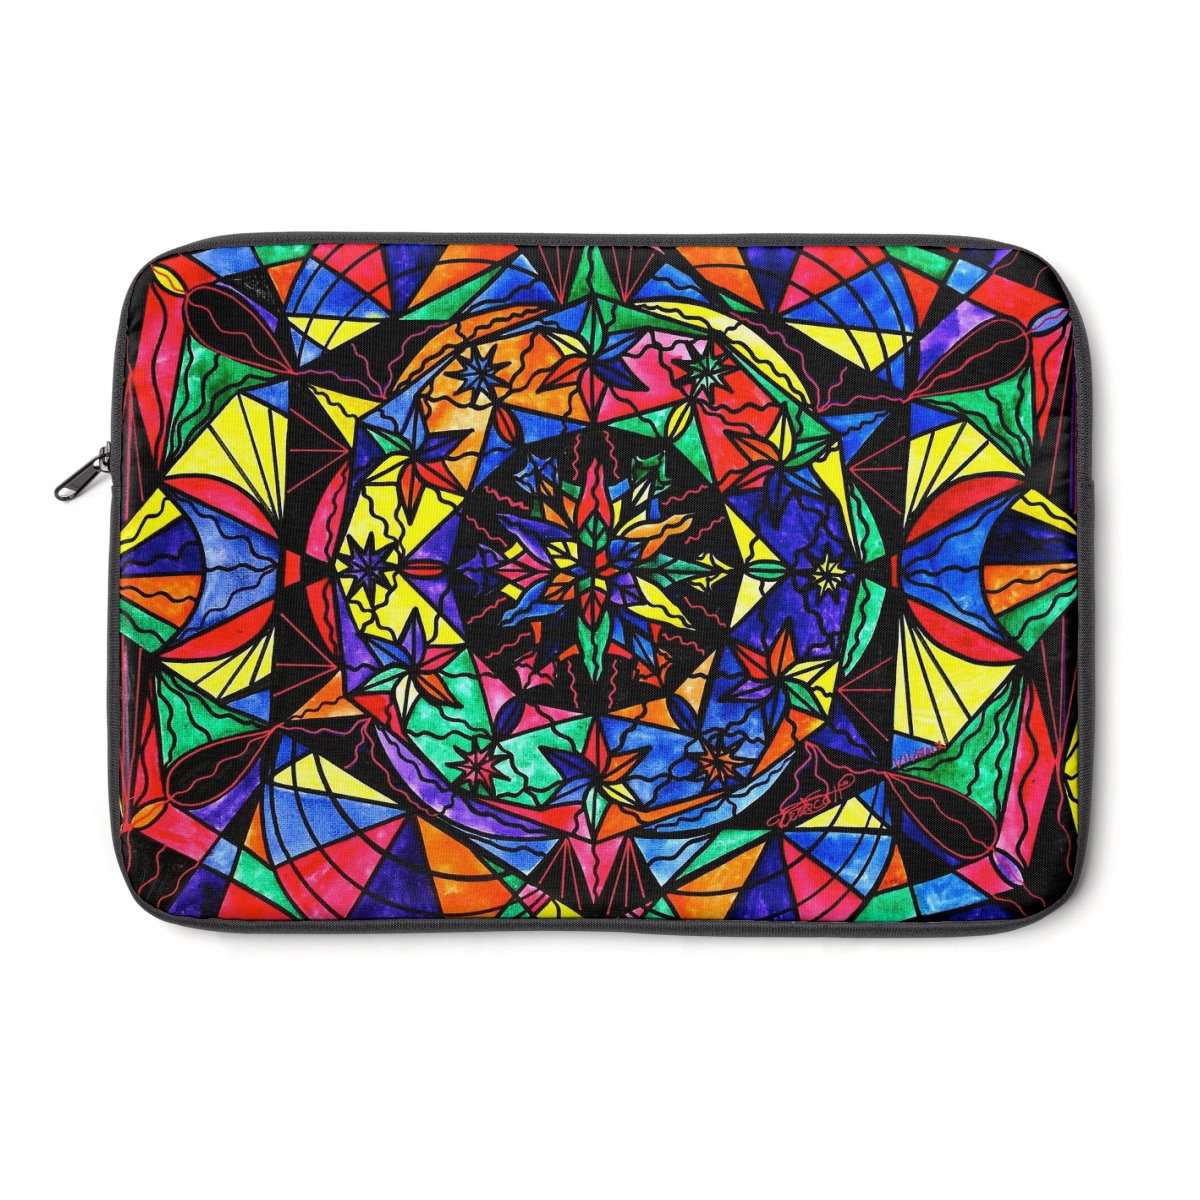 Reveal The Mystery - Laptop Sleeve